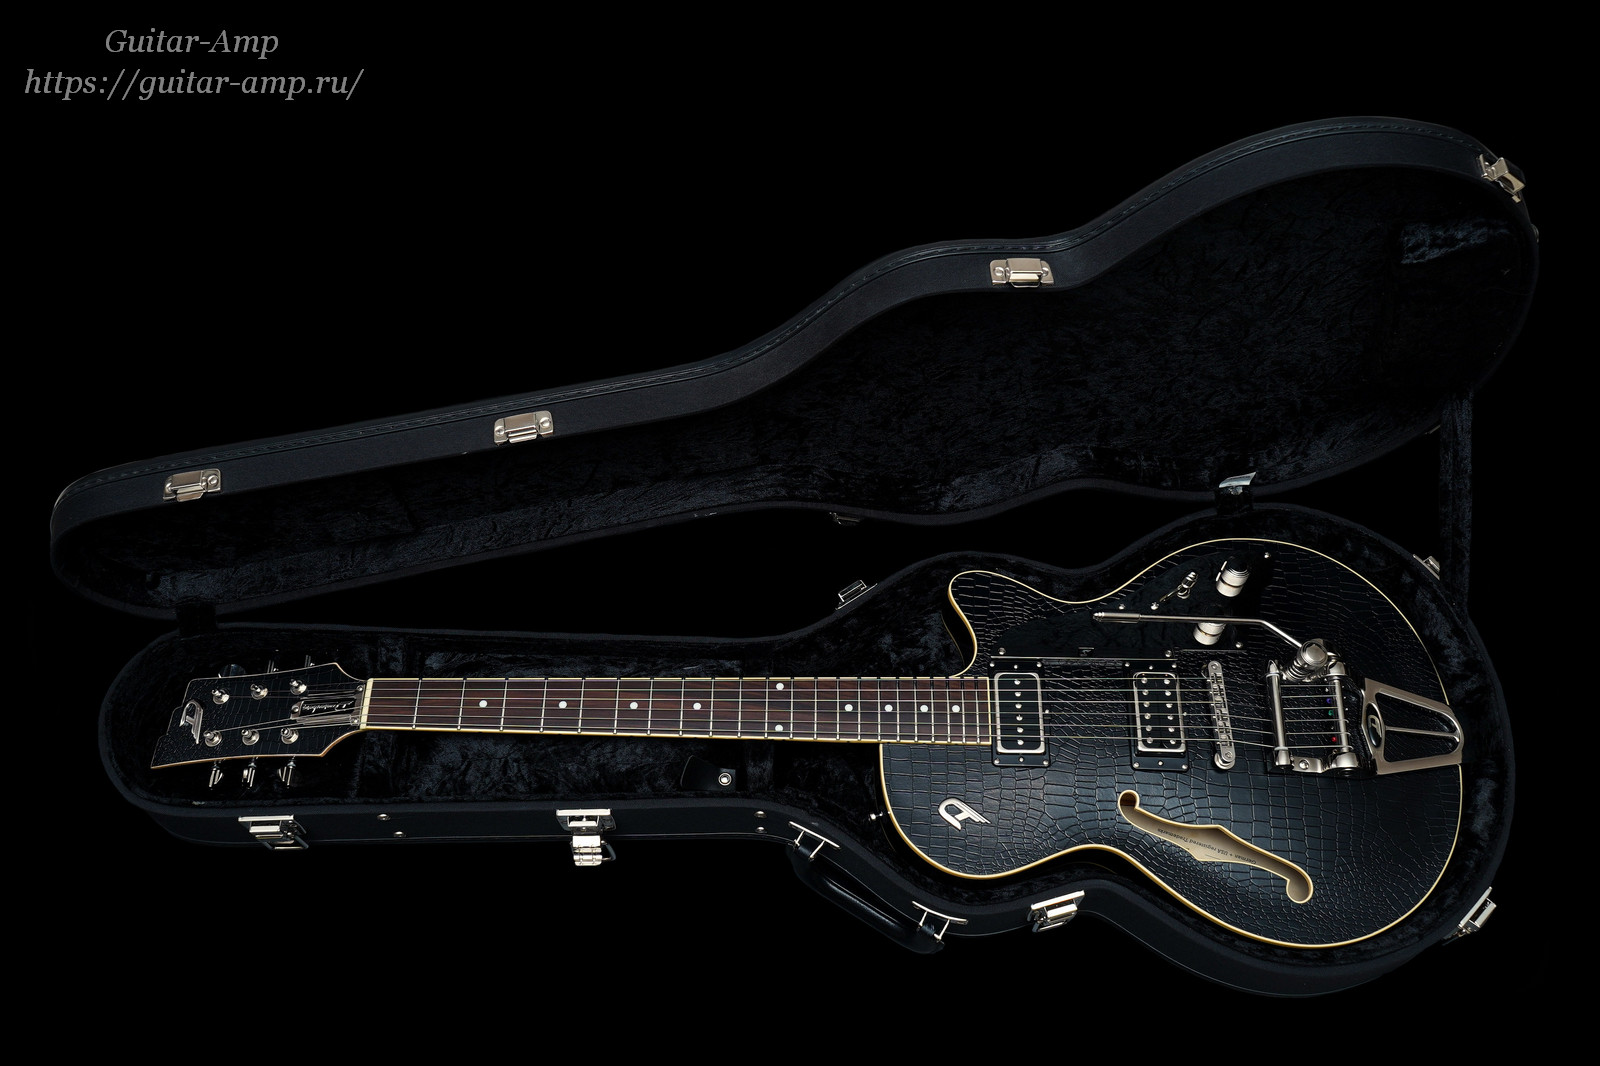 Duesenberg Starplayer TV Outlaw Limited Run with Tremolo System 2010 08_x1600.jpg